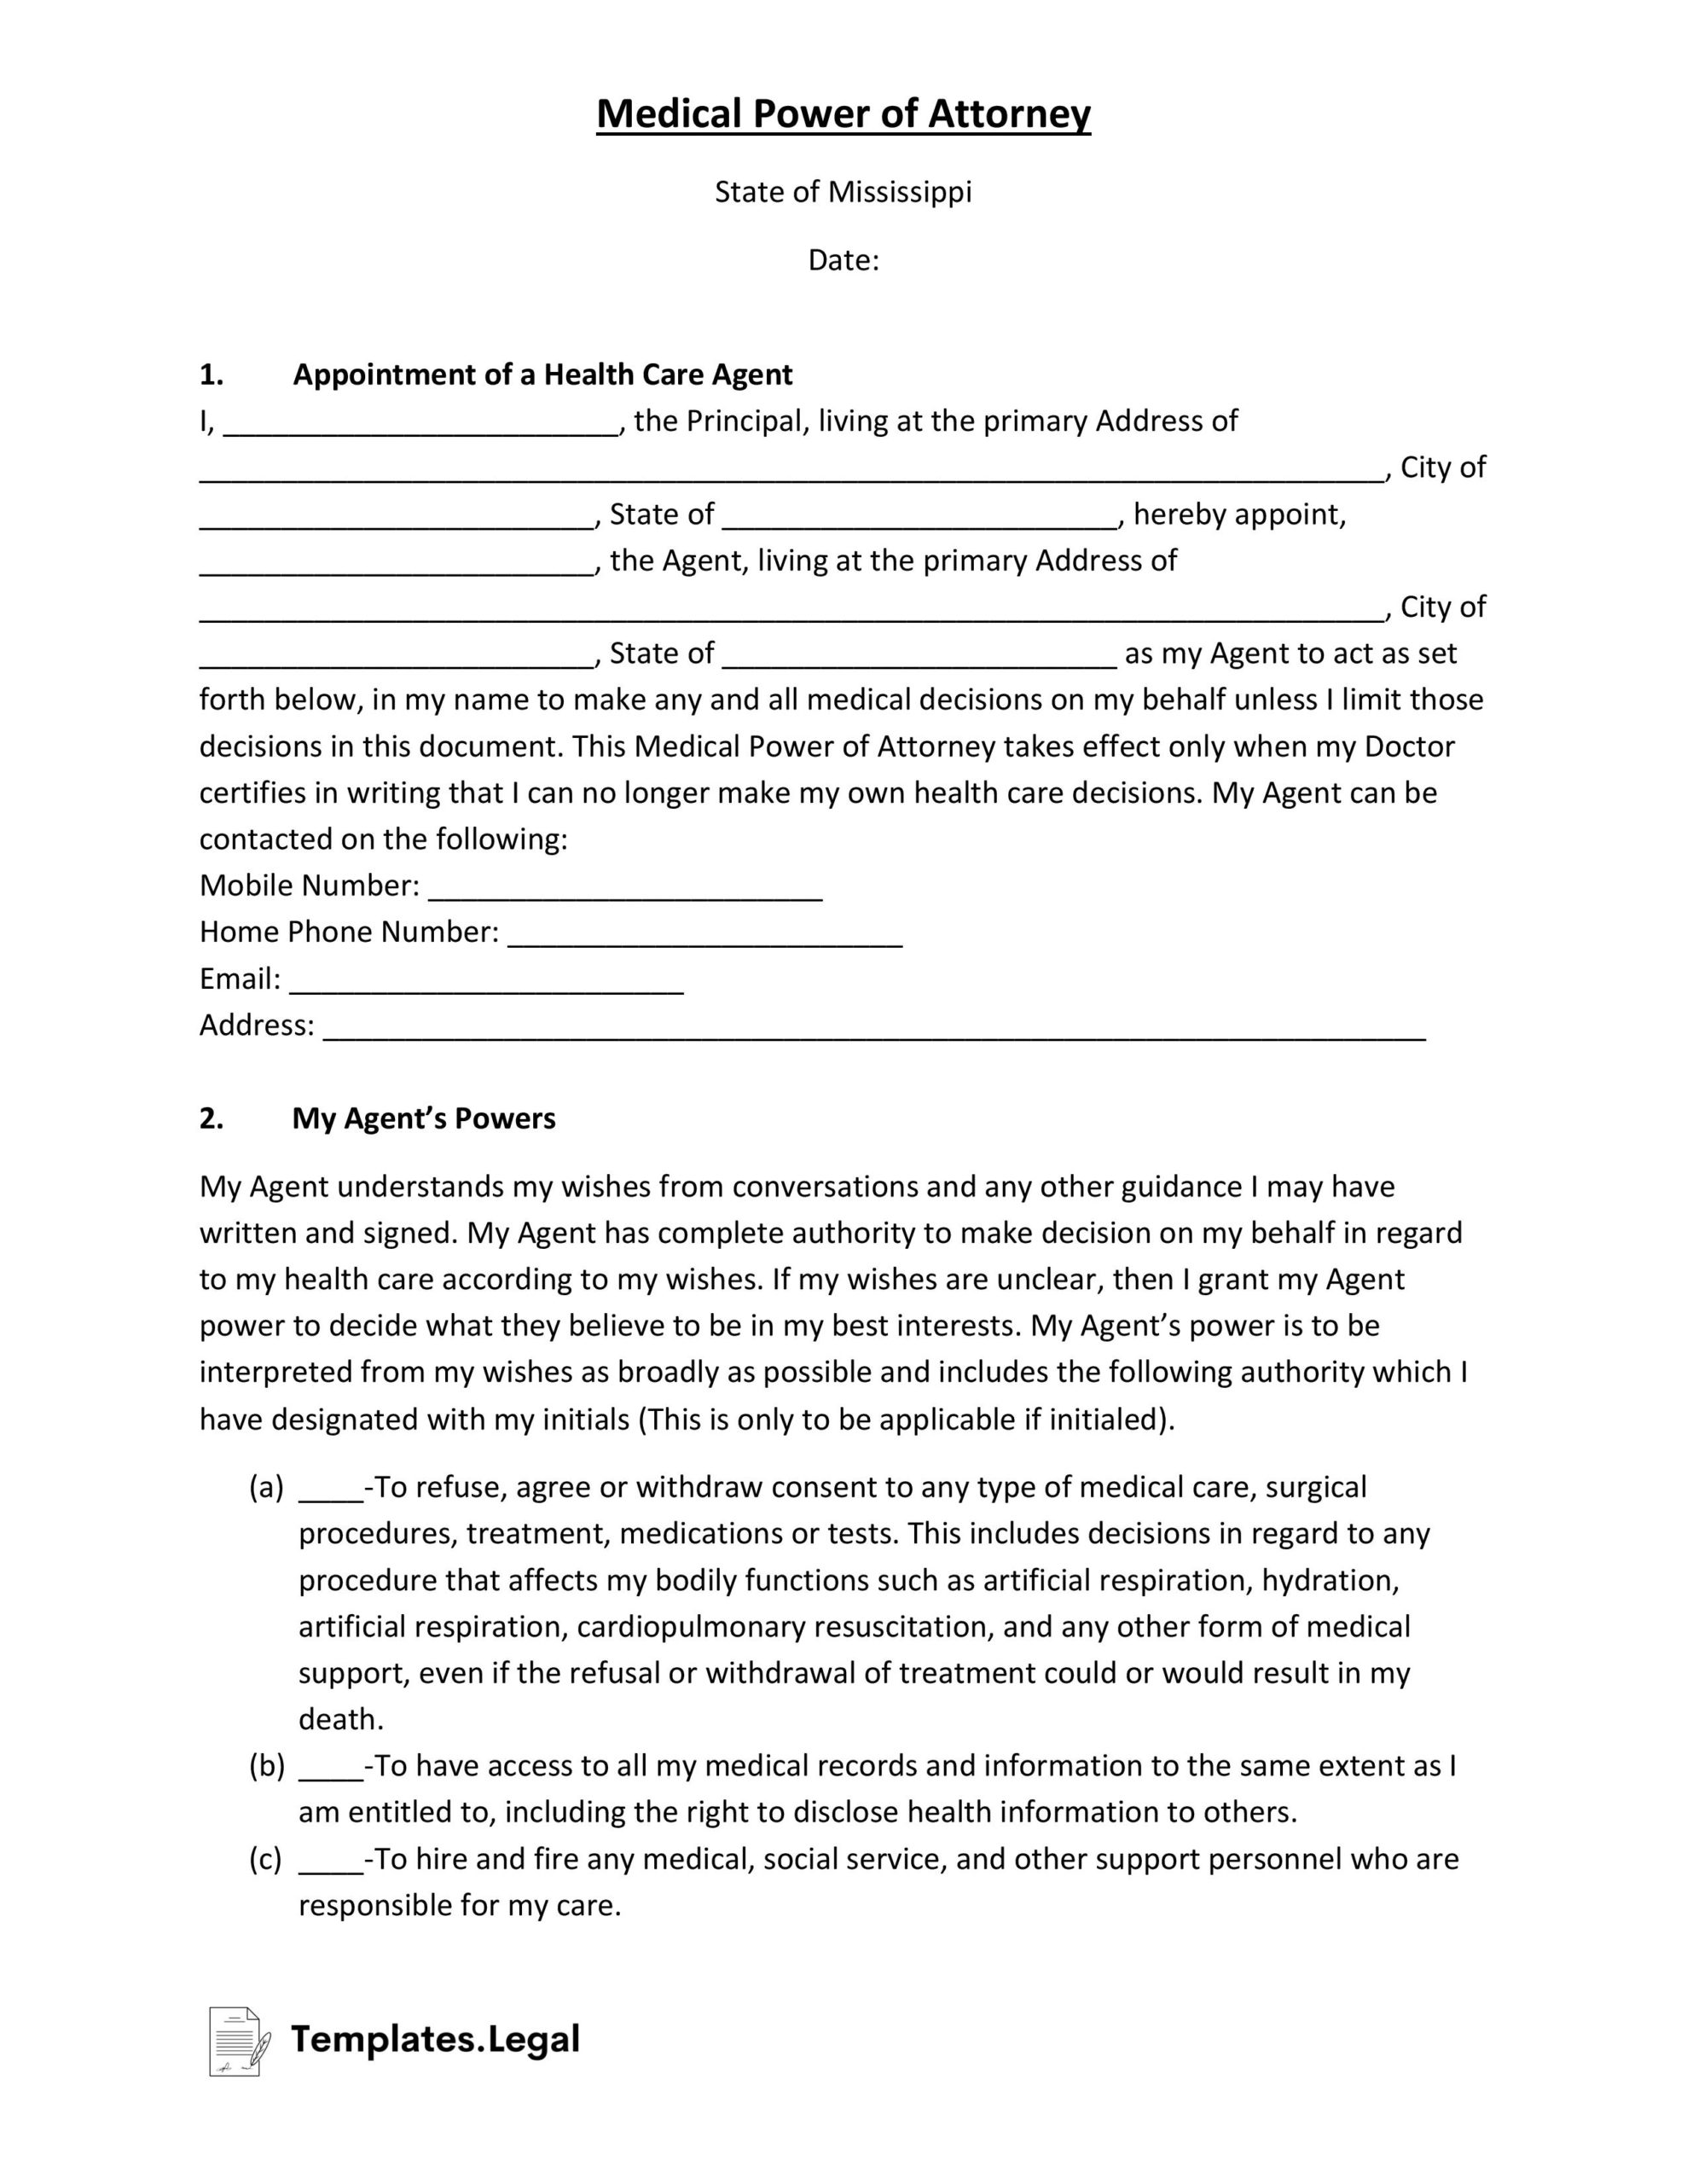 Mississippi Medical Power of Attorney- Templates.Legal